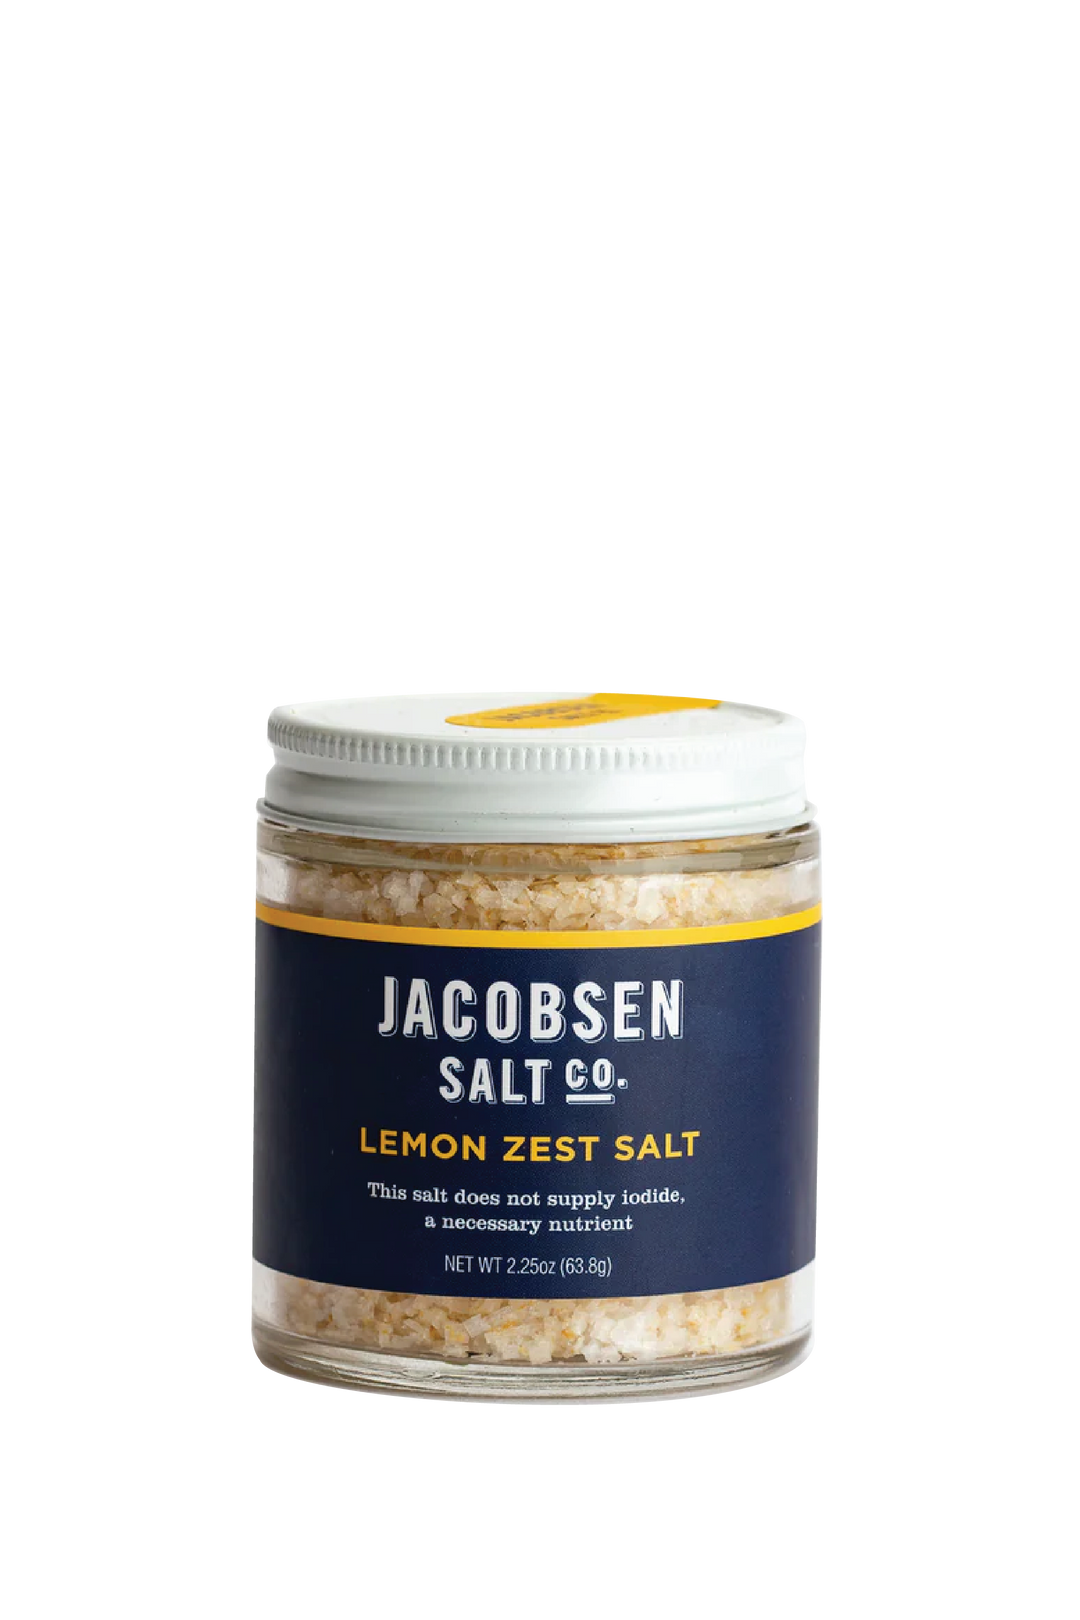 A Photo Of Lemon Zest Salt in a glass jar with a blue label. White Background.